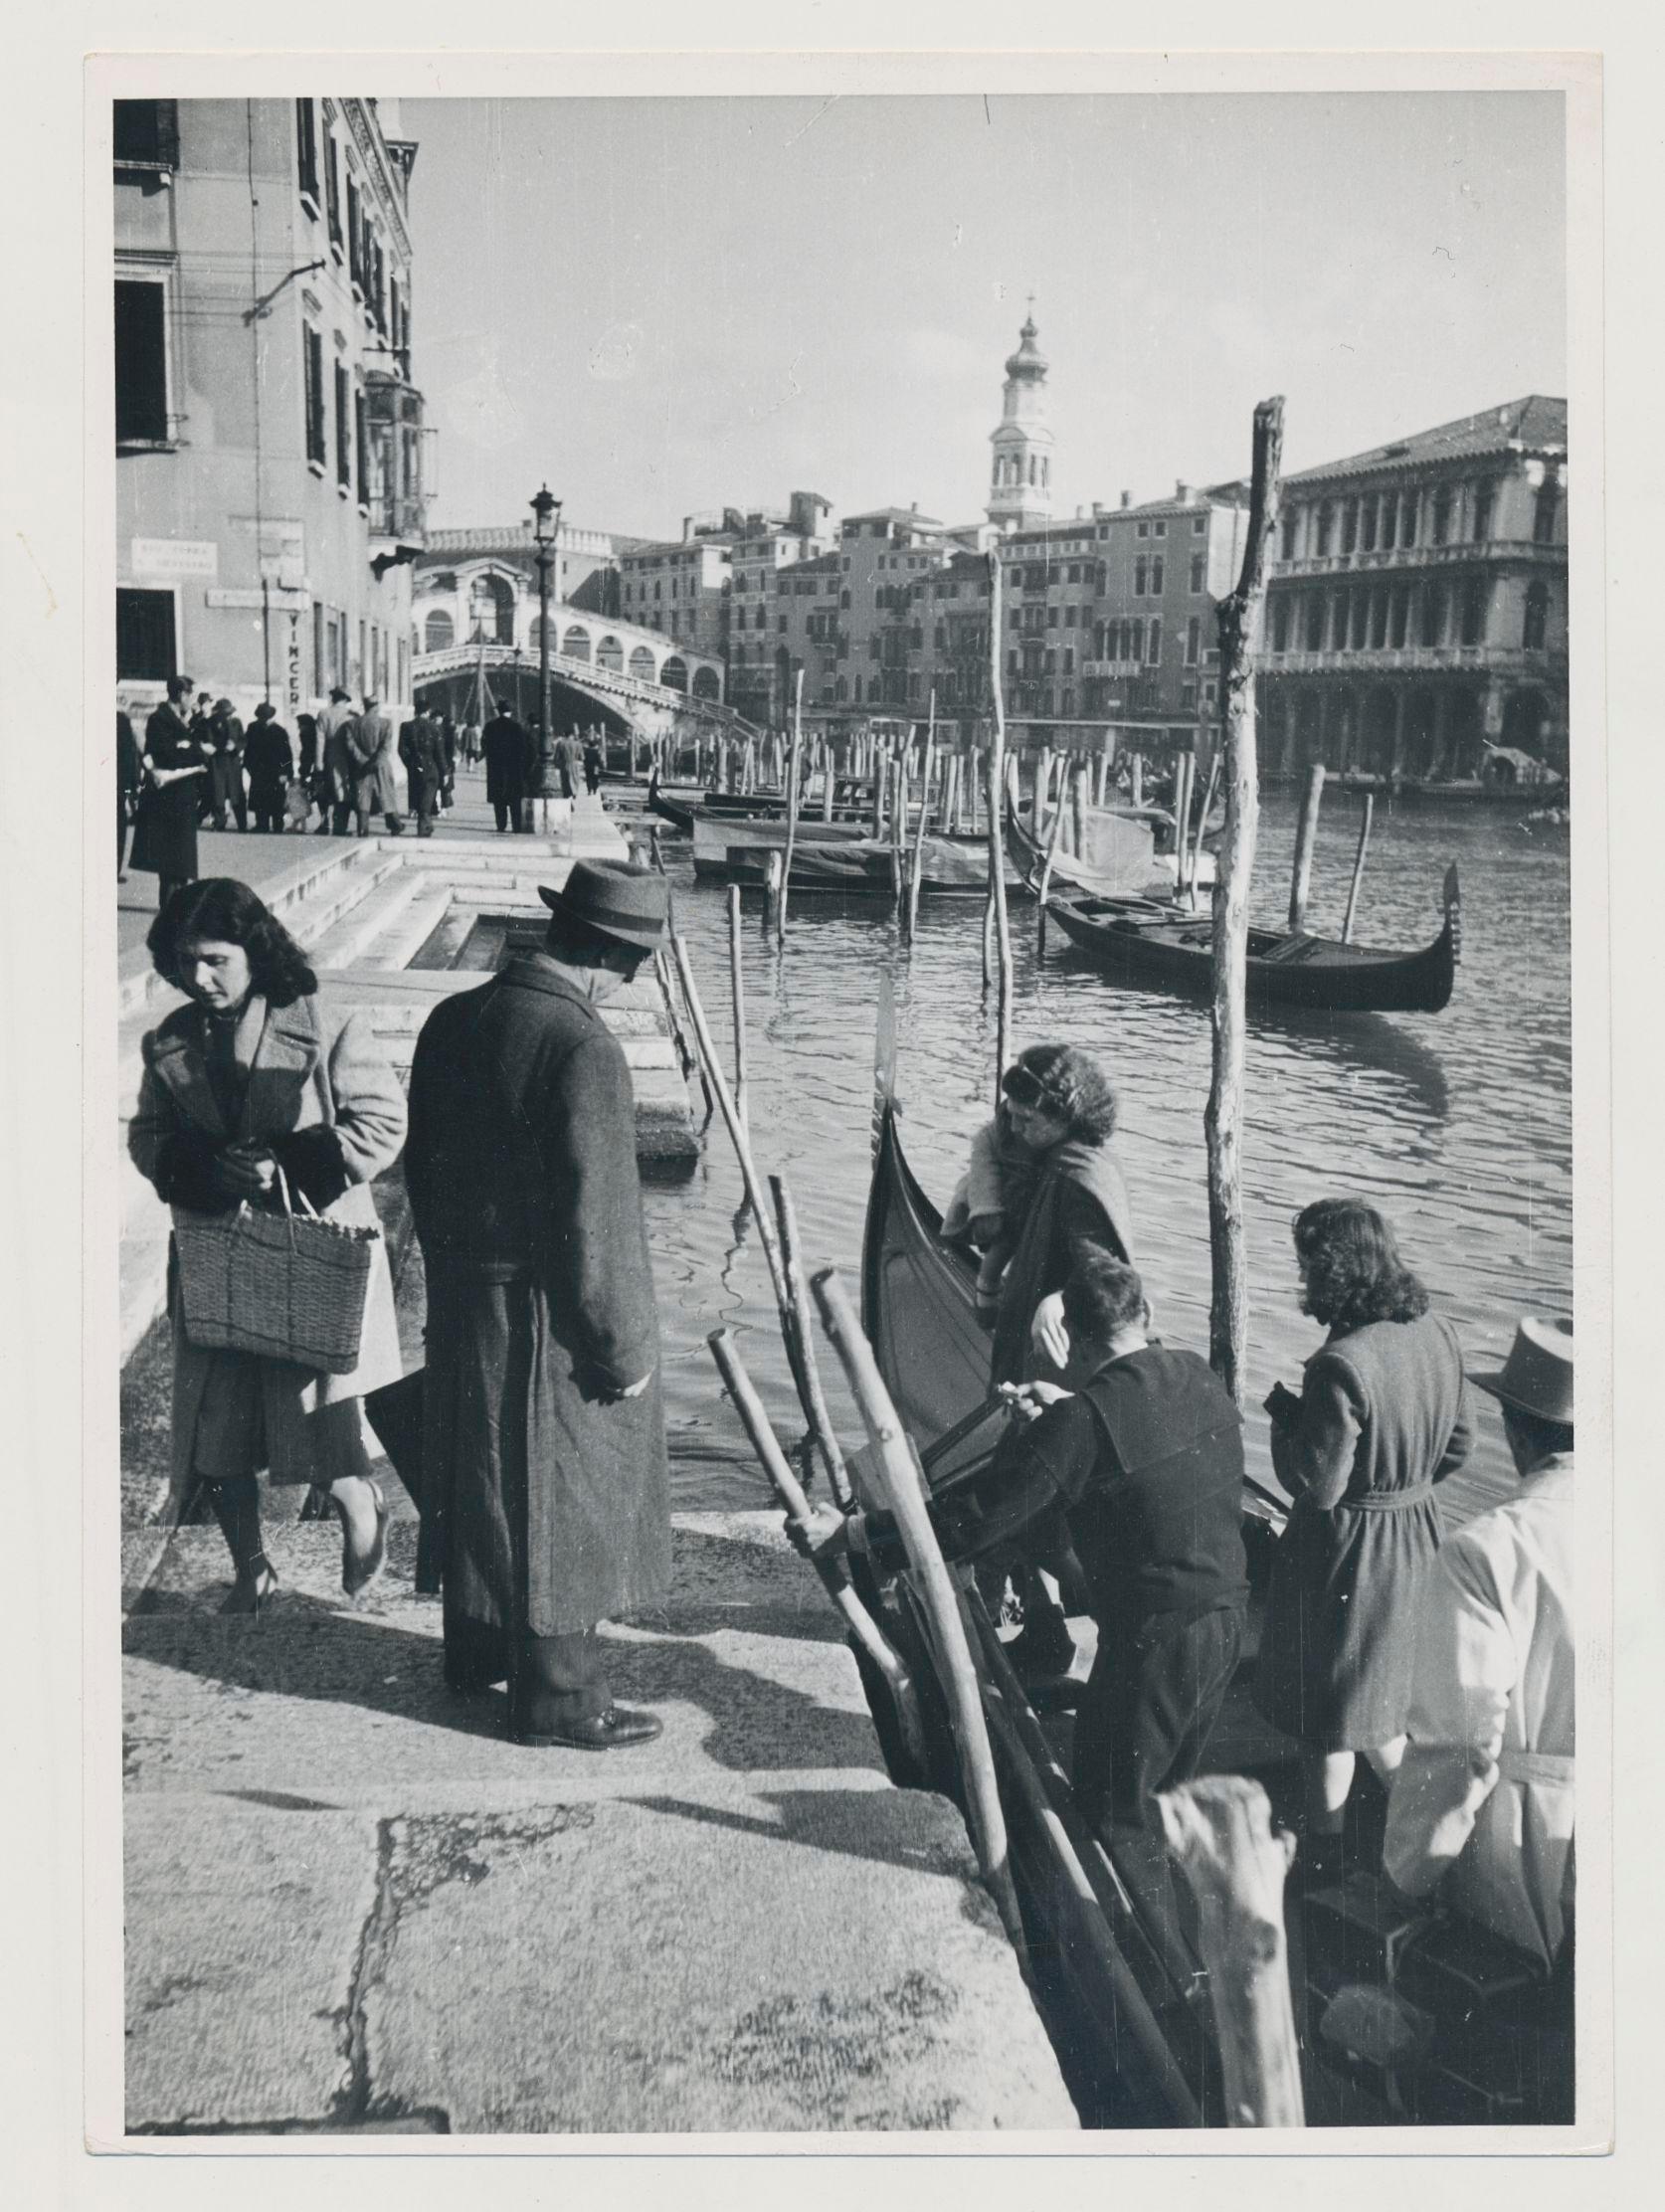 Venice - Gondola on Water with people, Italy, 1950s, 17, 3 x 11, 5 cm